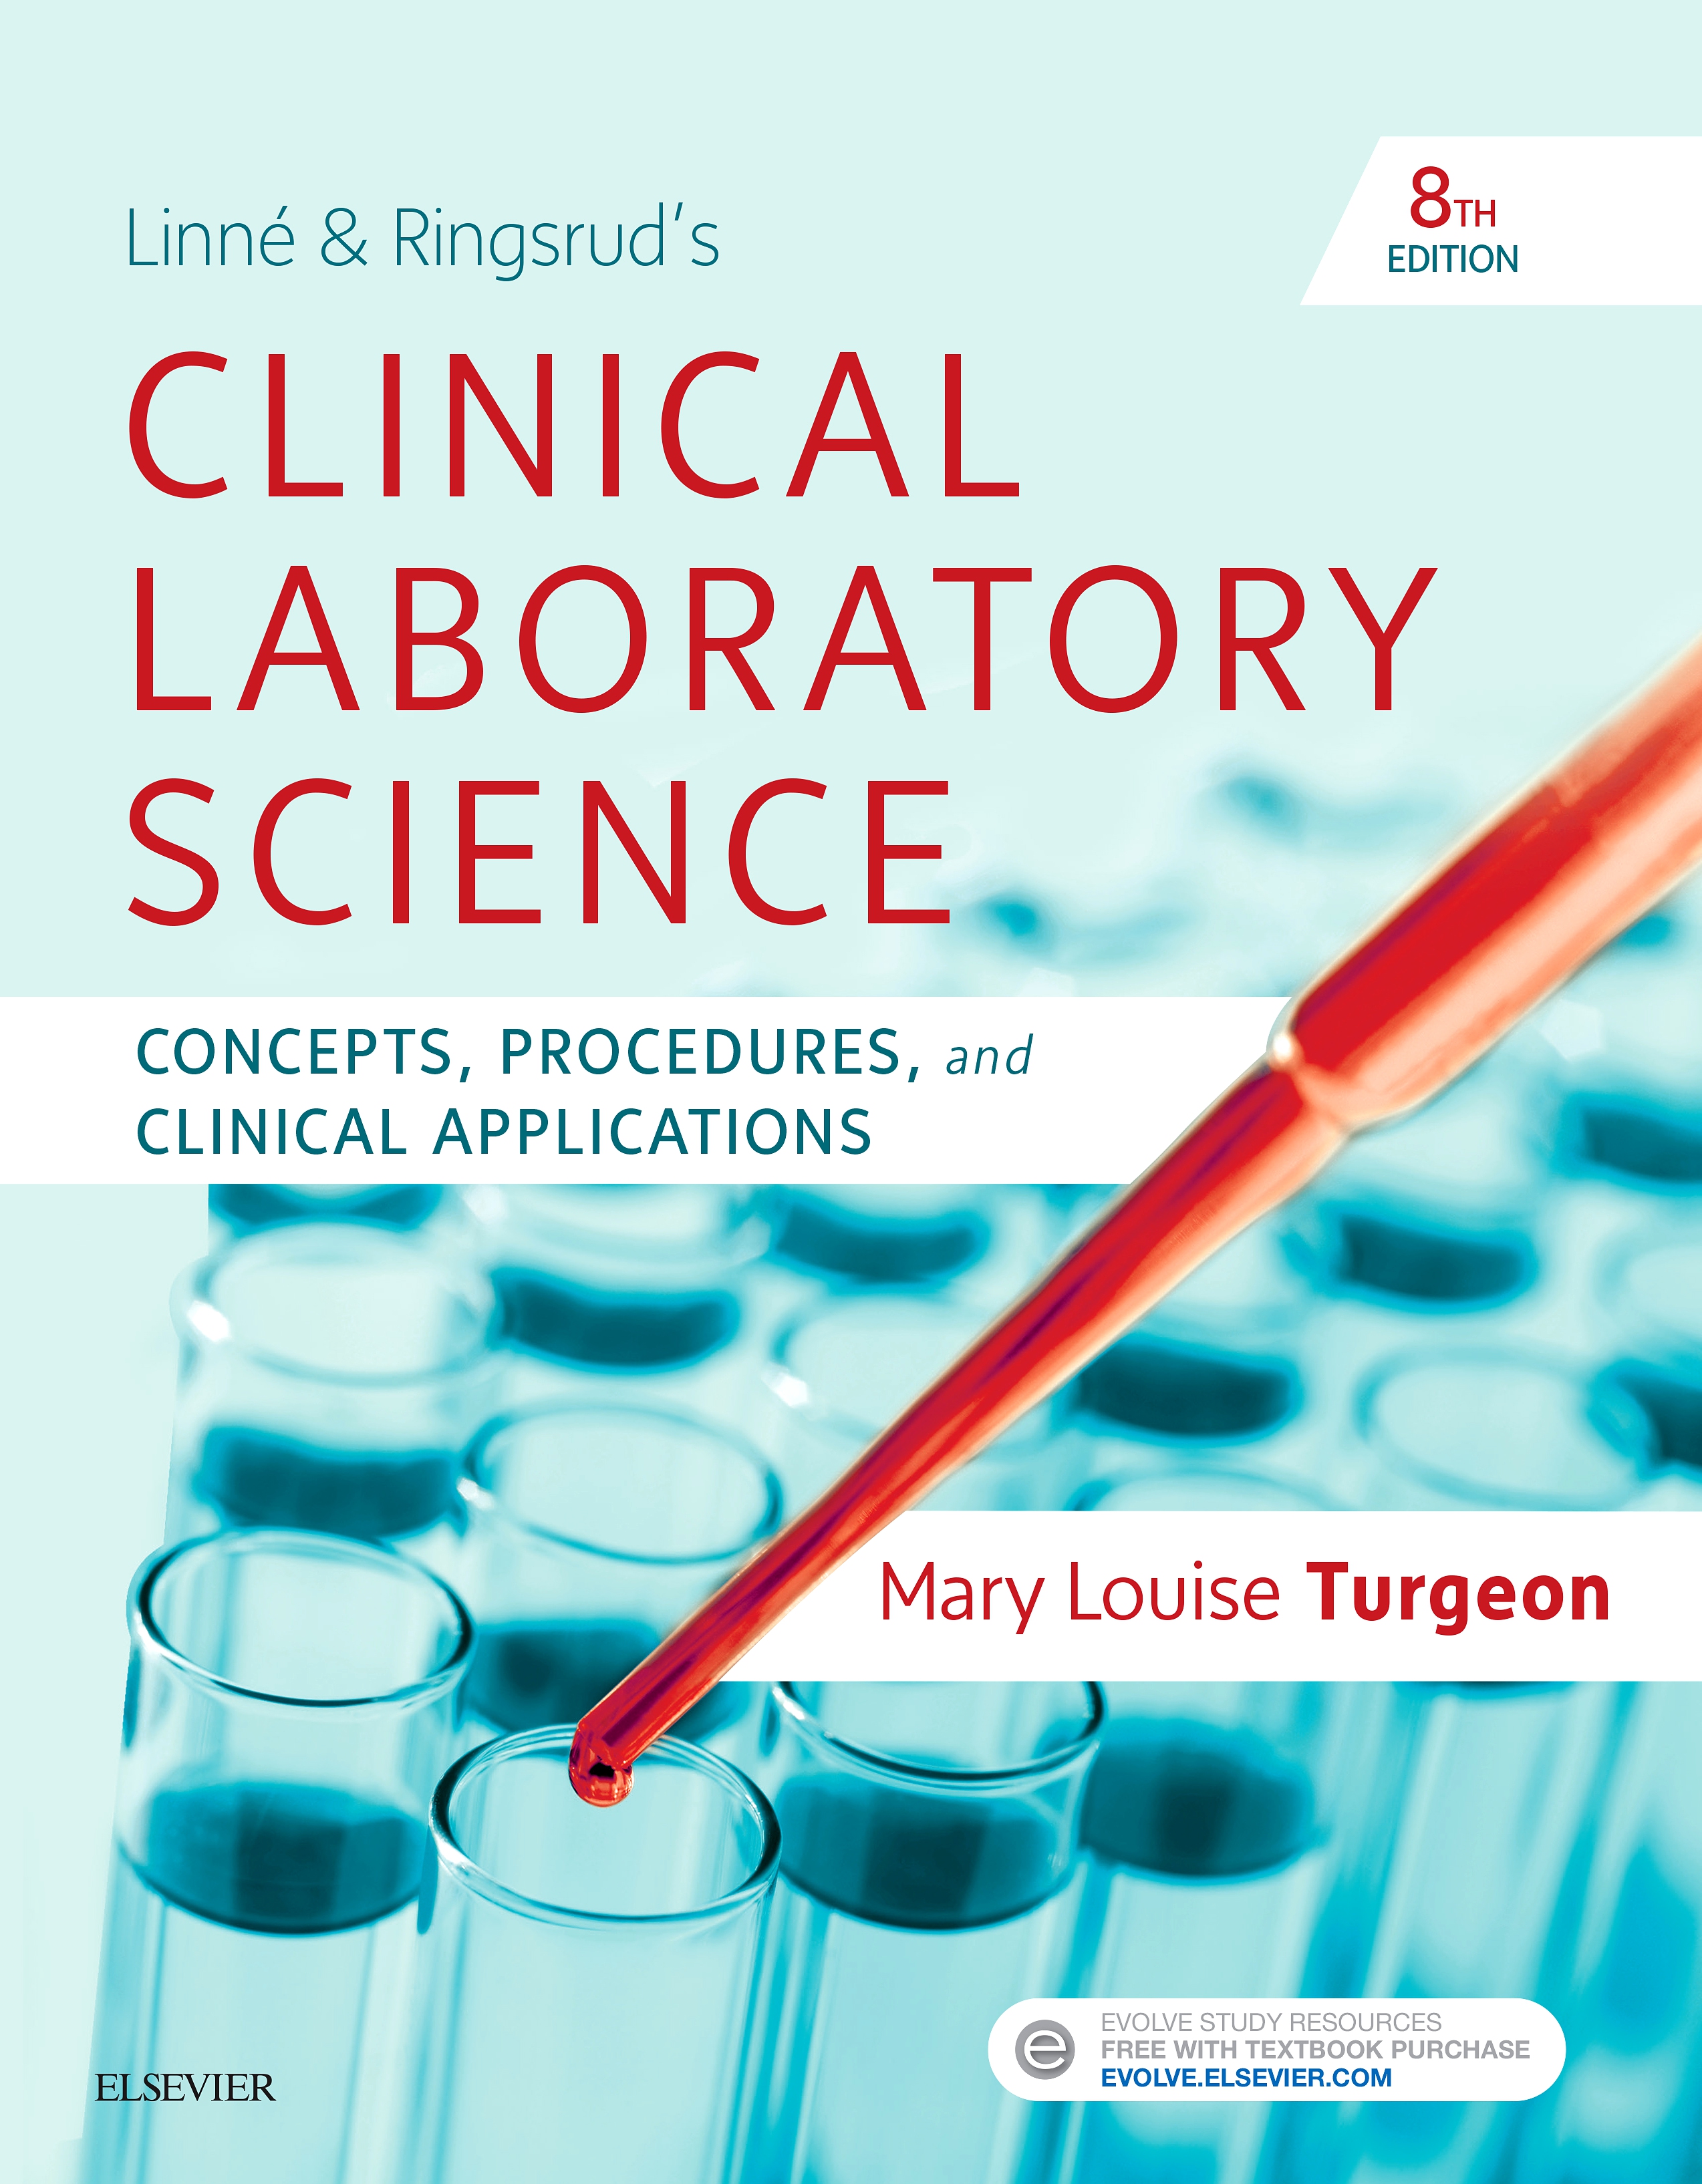 Evolve Resources for Linne & Ringsrud's Clinical Laboratory Science, 8th